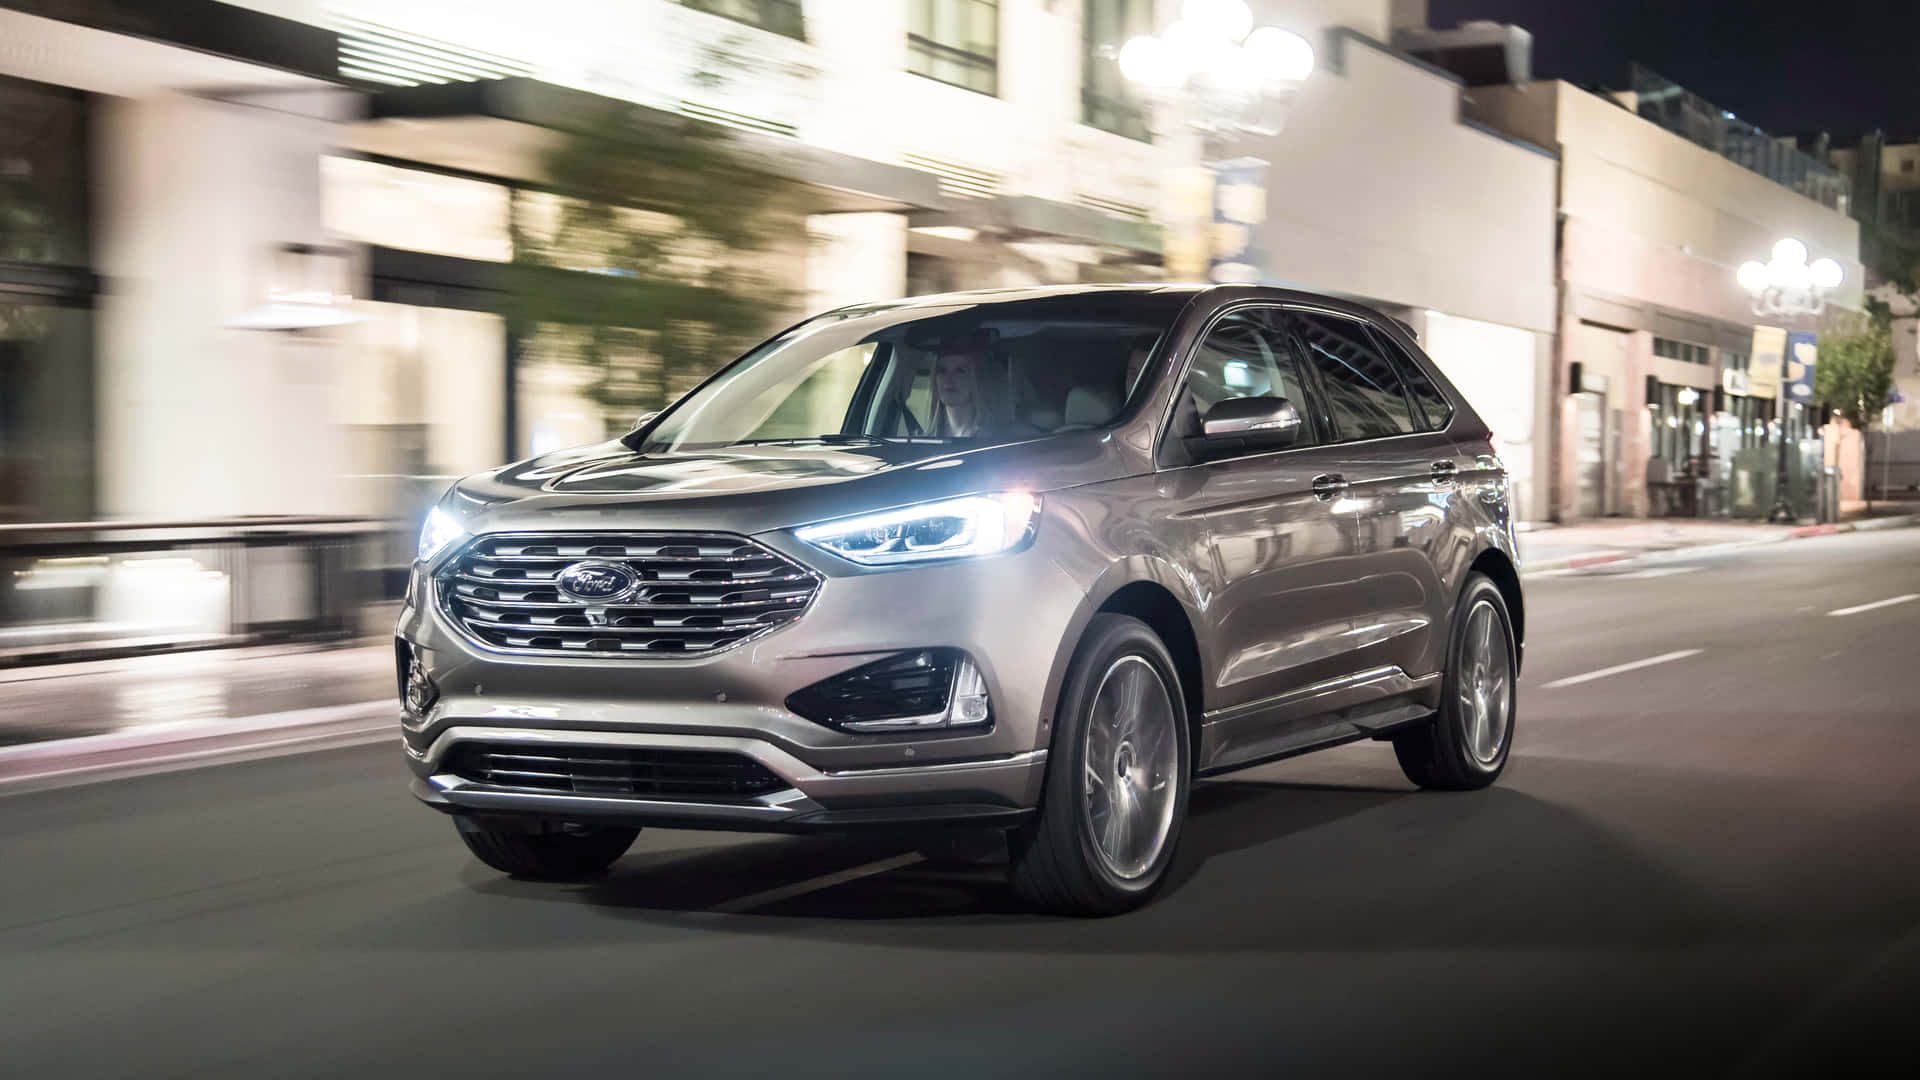 Stunning Ford Edge on the open road Wallpaper